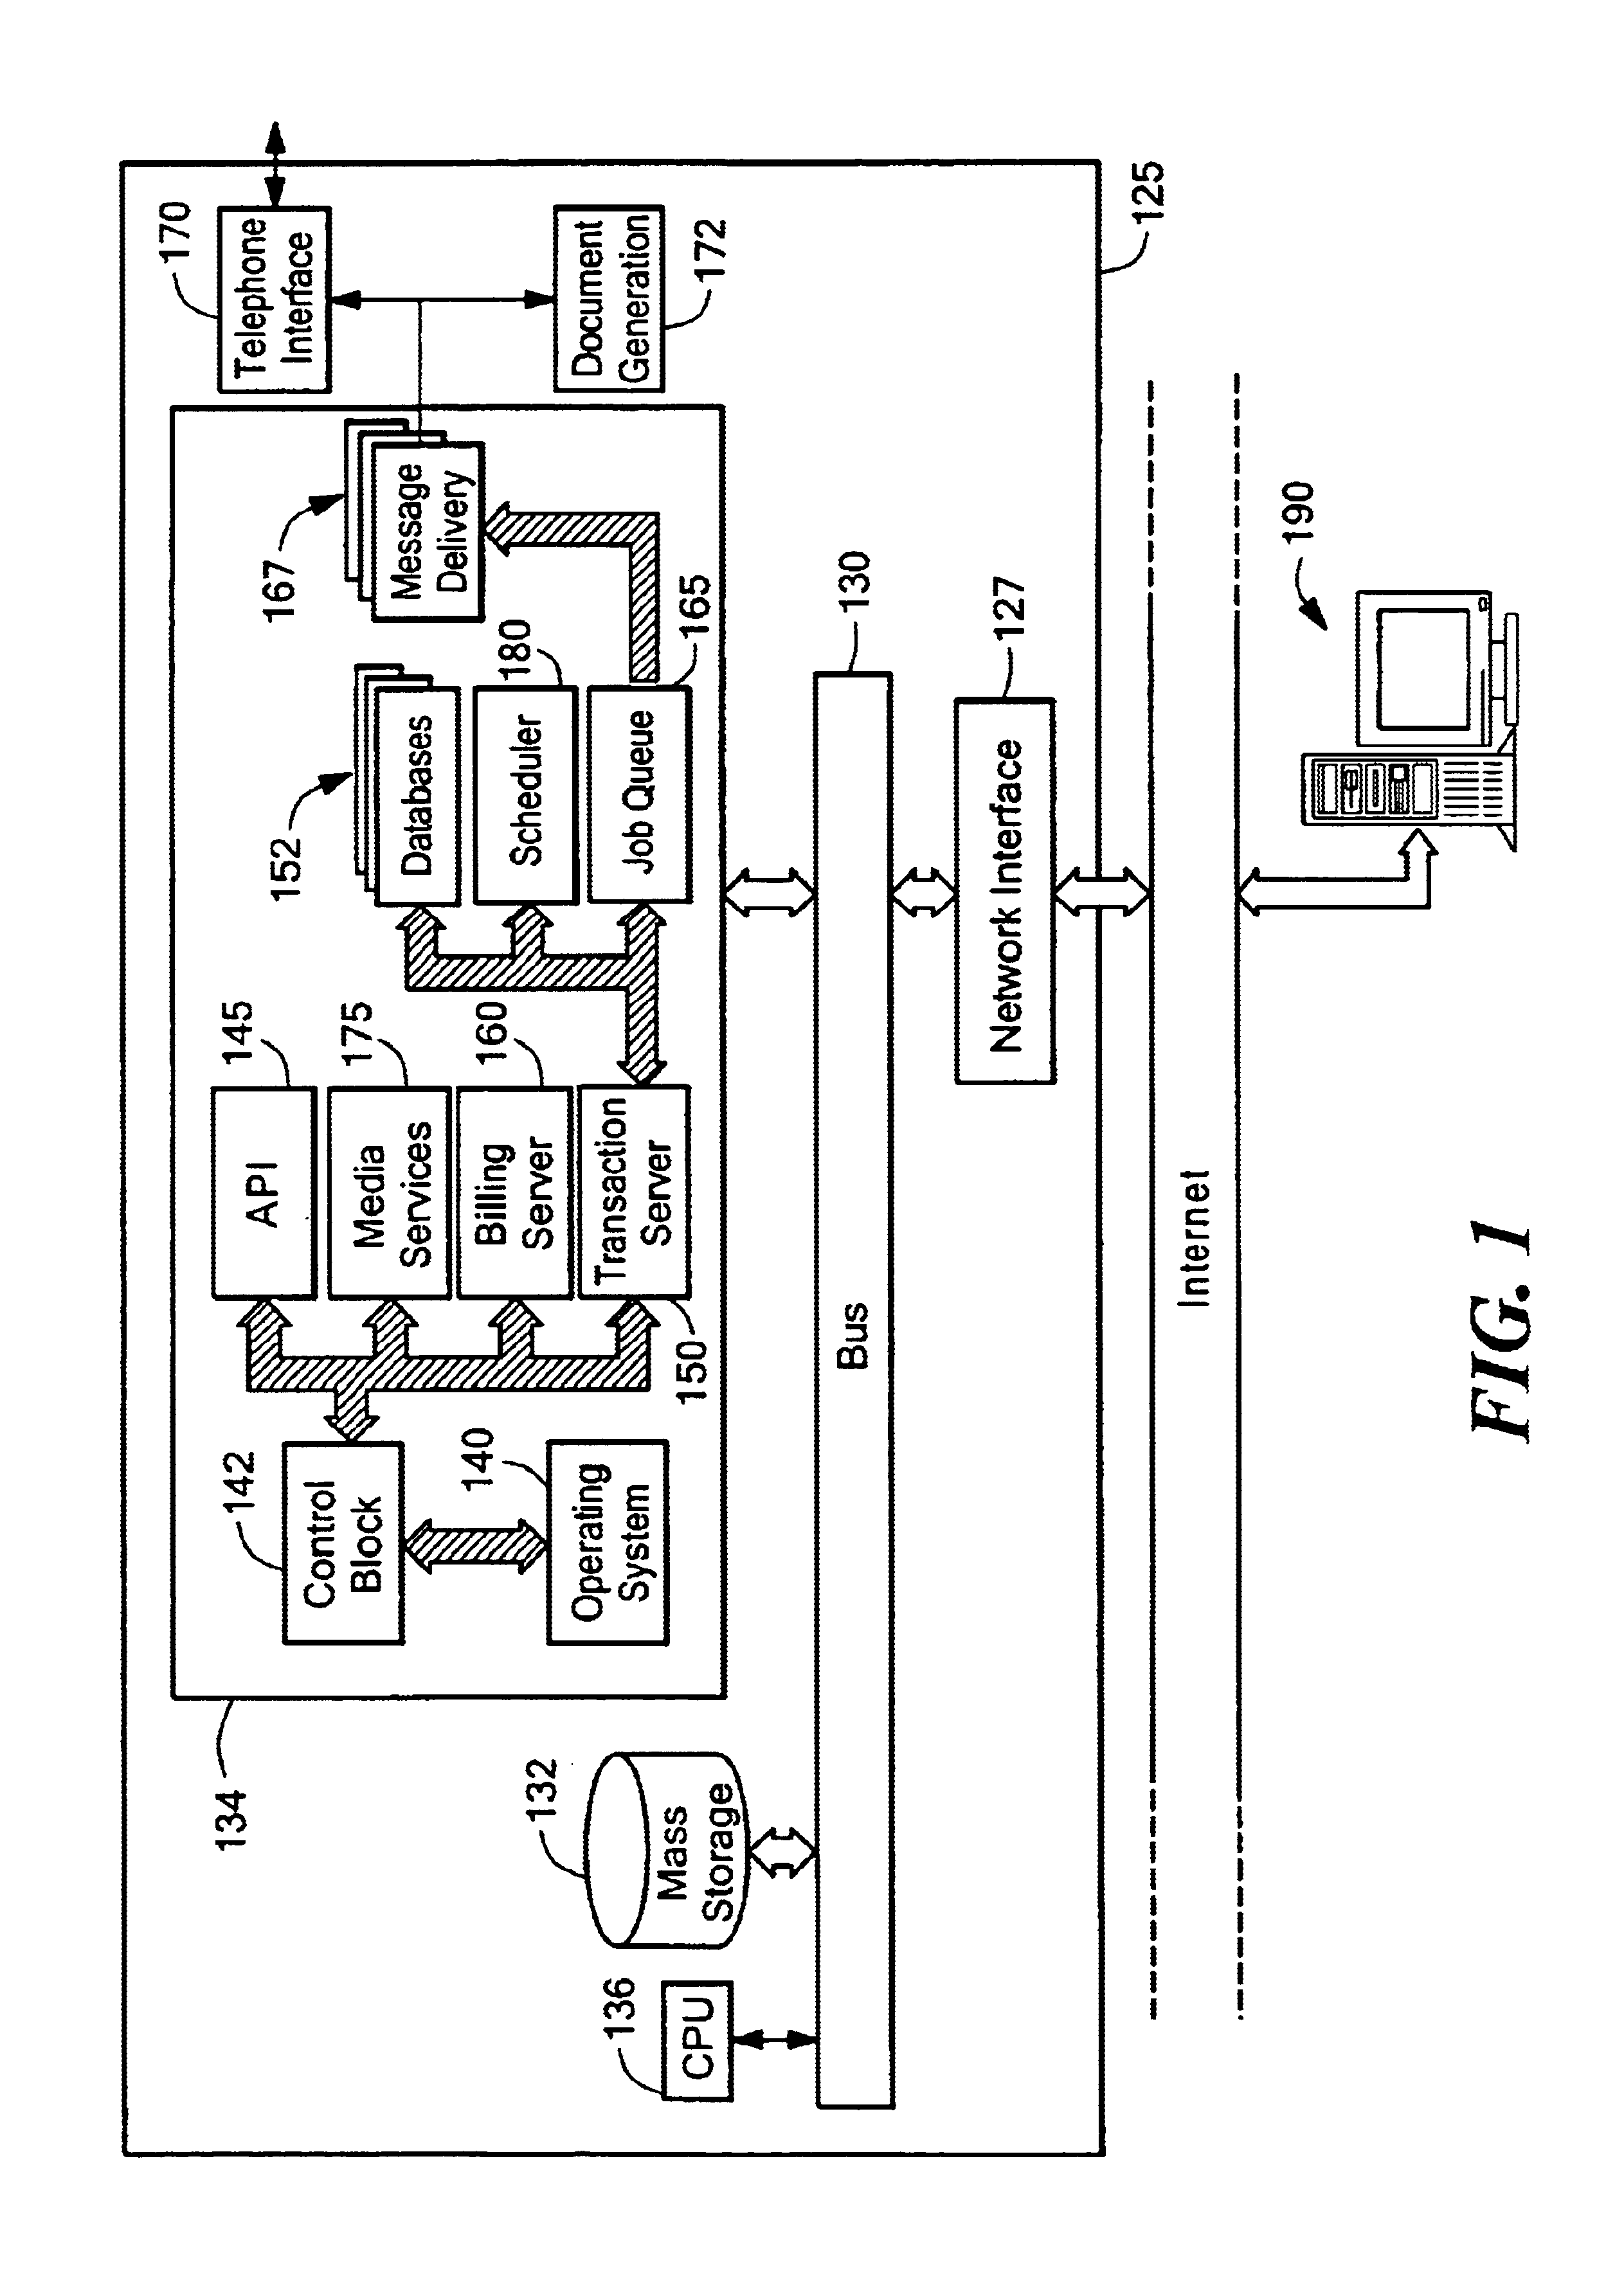 Application program interface for message routing and management system